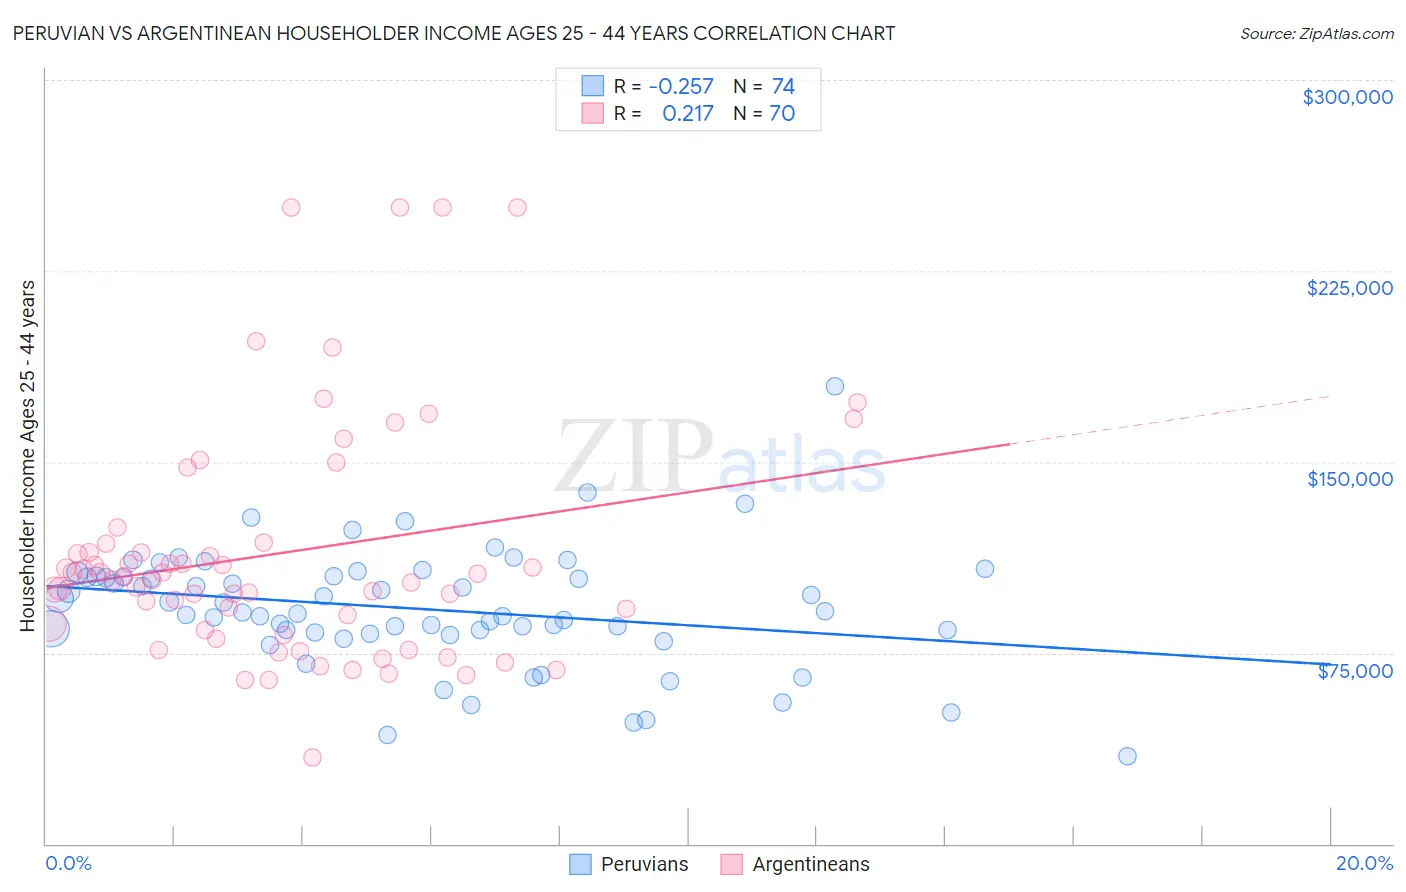 Peruvian vs Argentinean Householder Income Ages 25 - 44 years